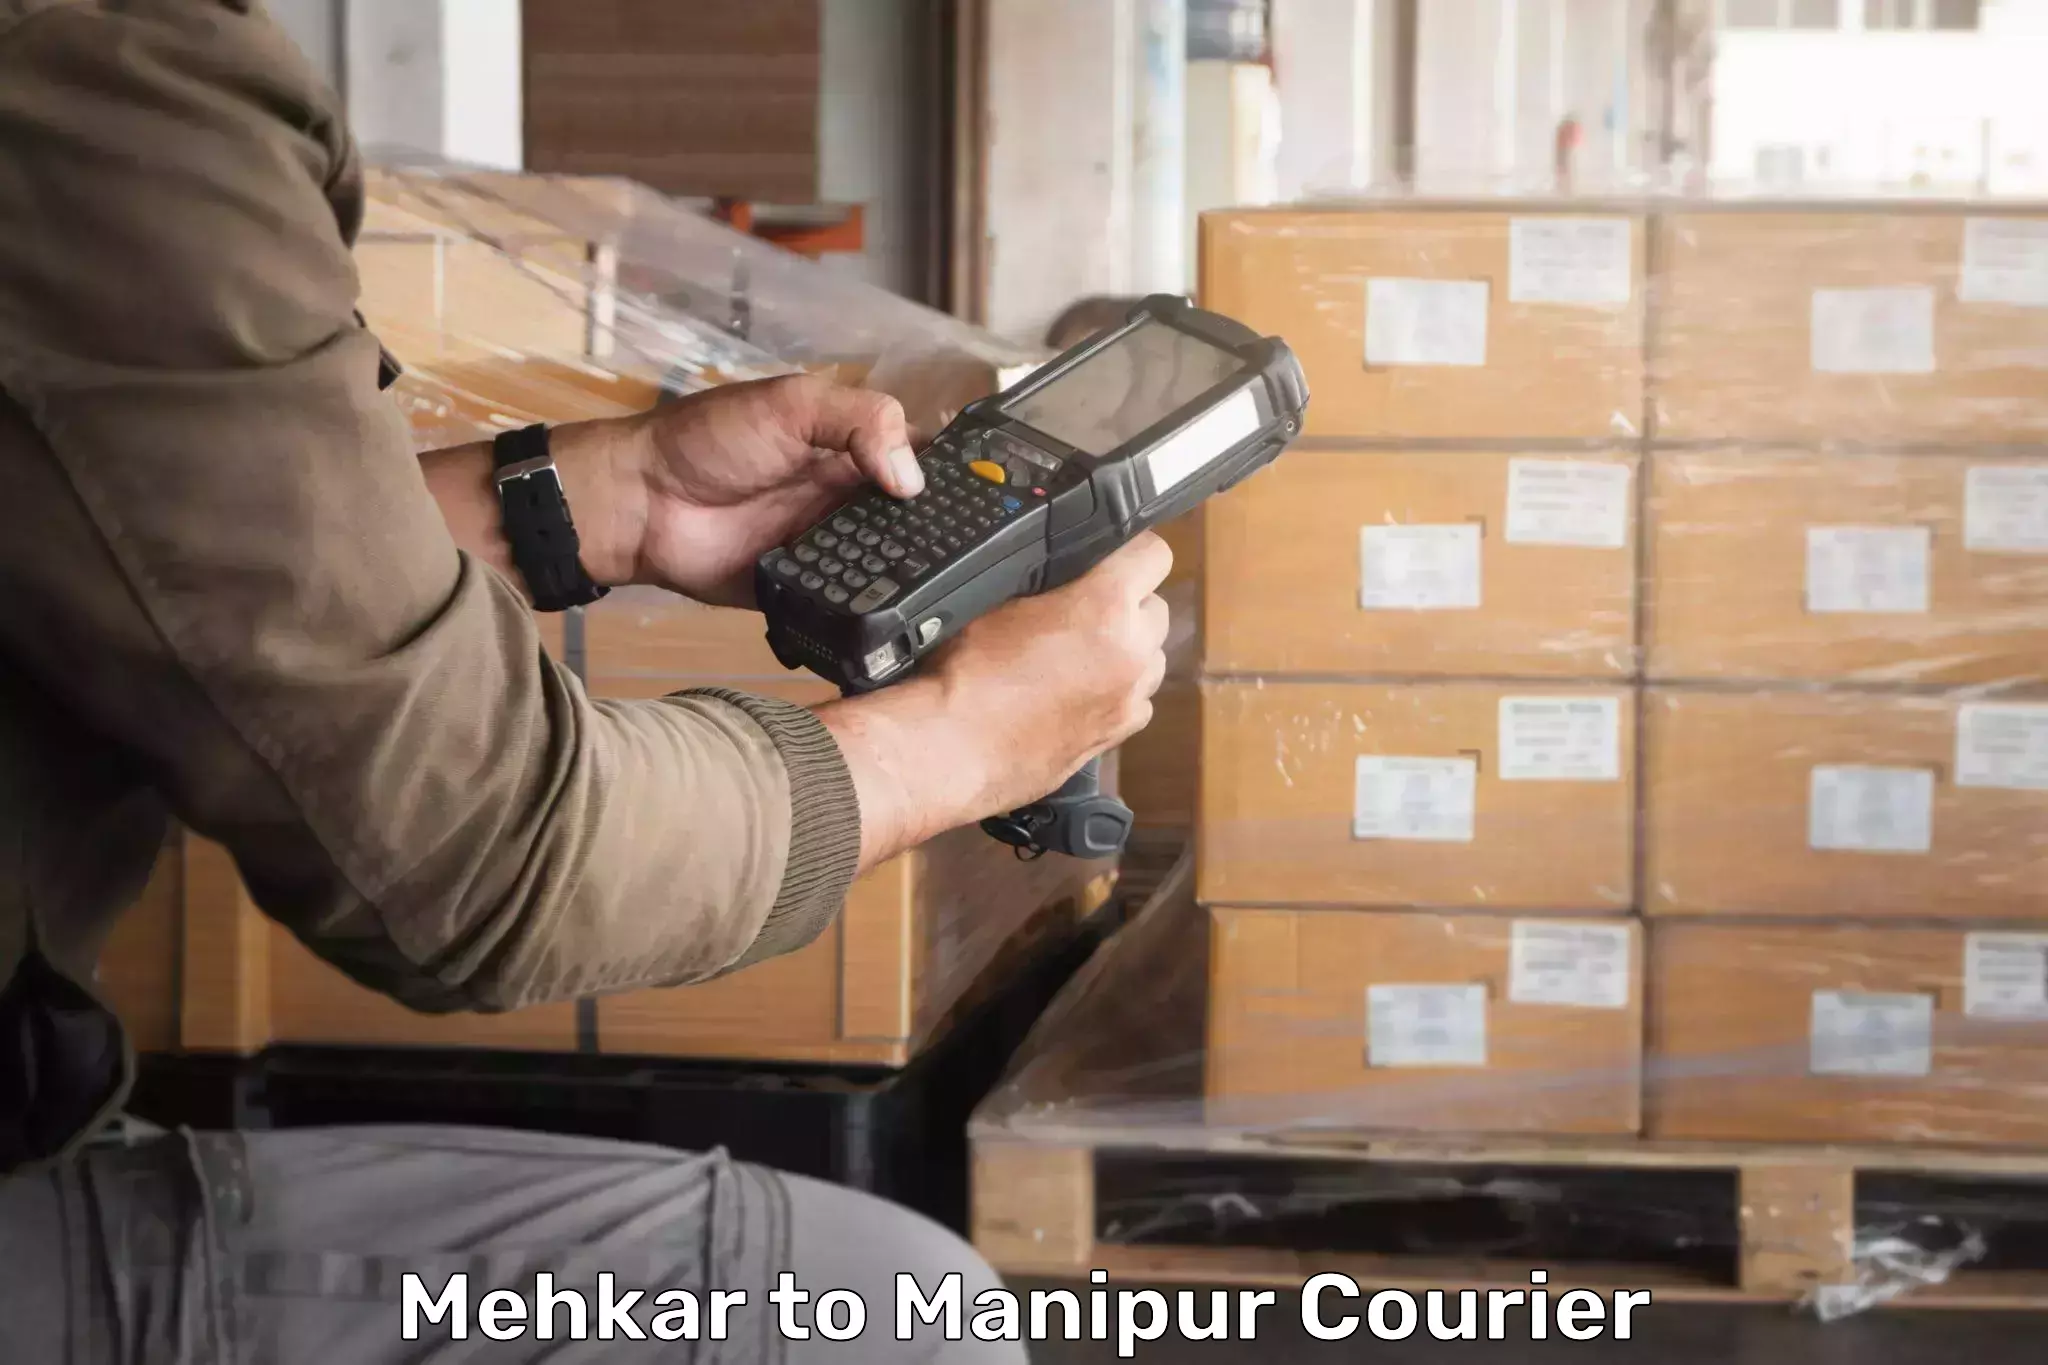 Enhanced tracking features Mehkar to Manipur